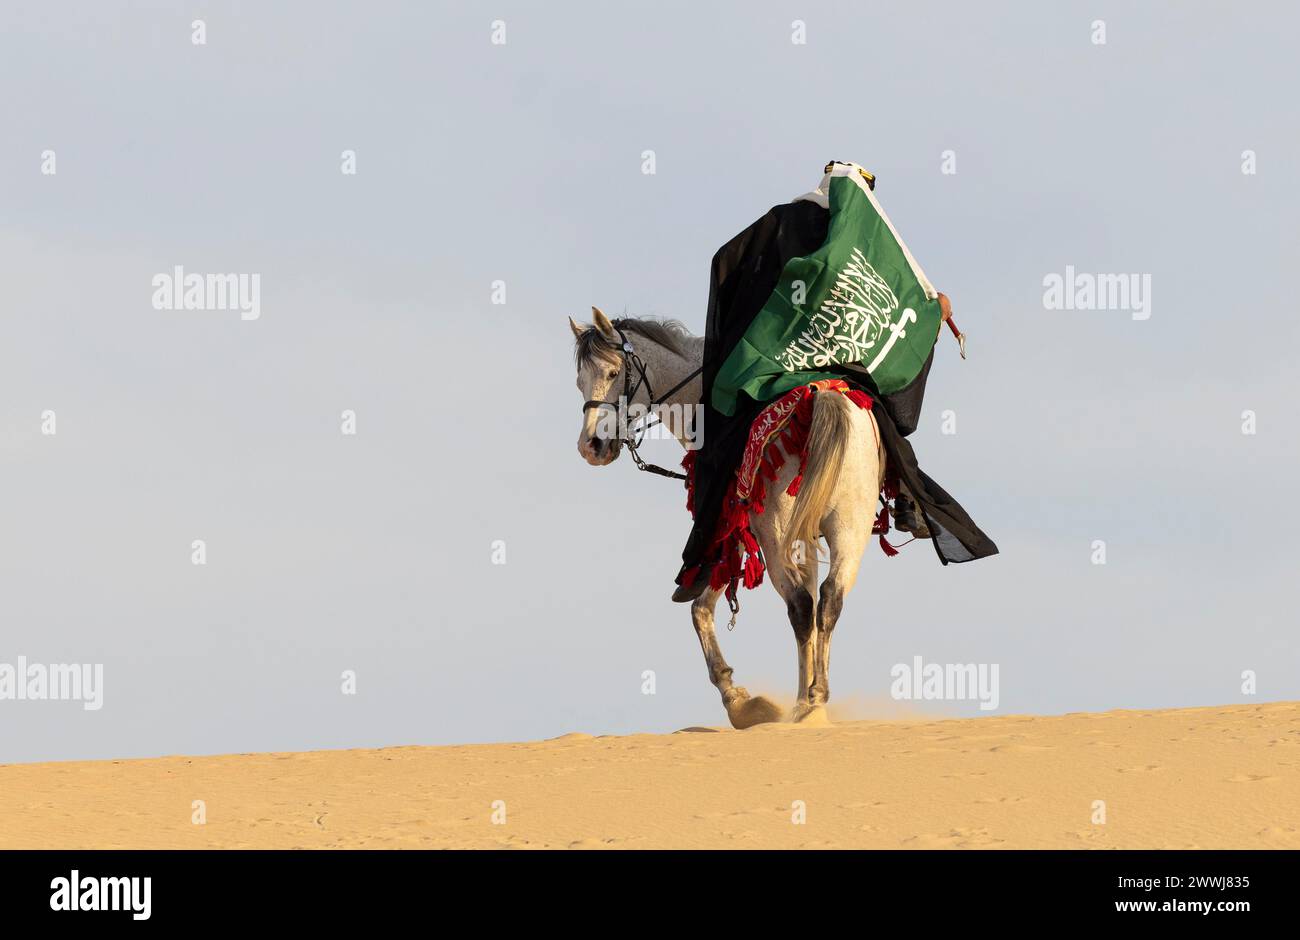 Saudi man in traditional clothing with his white stallion Stock Photo